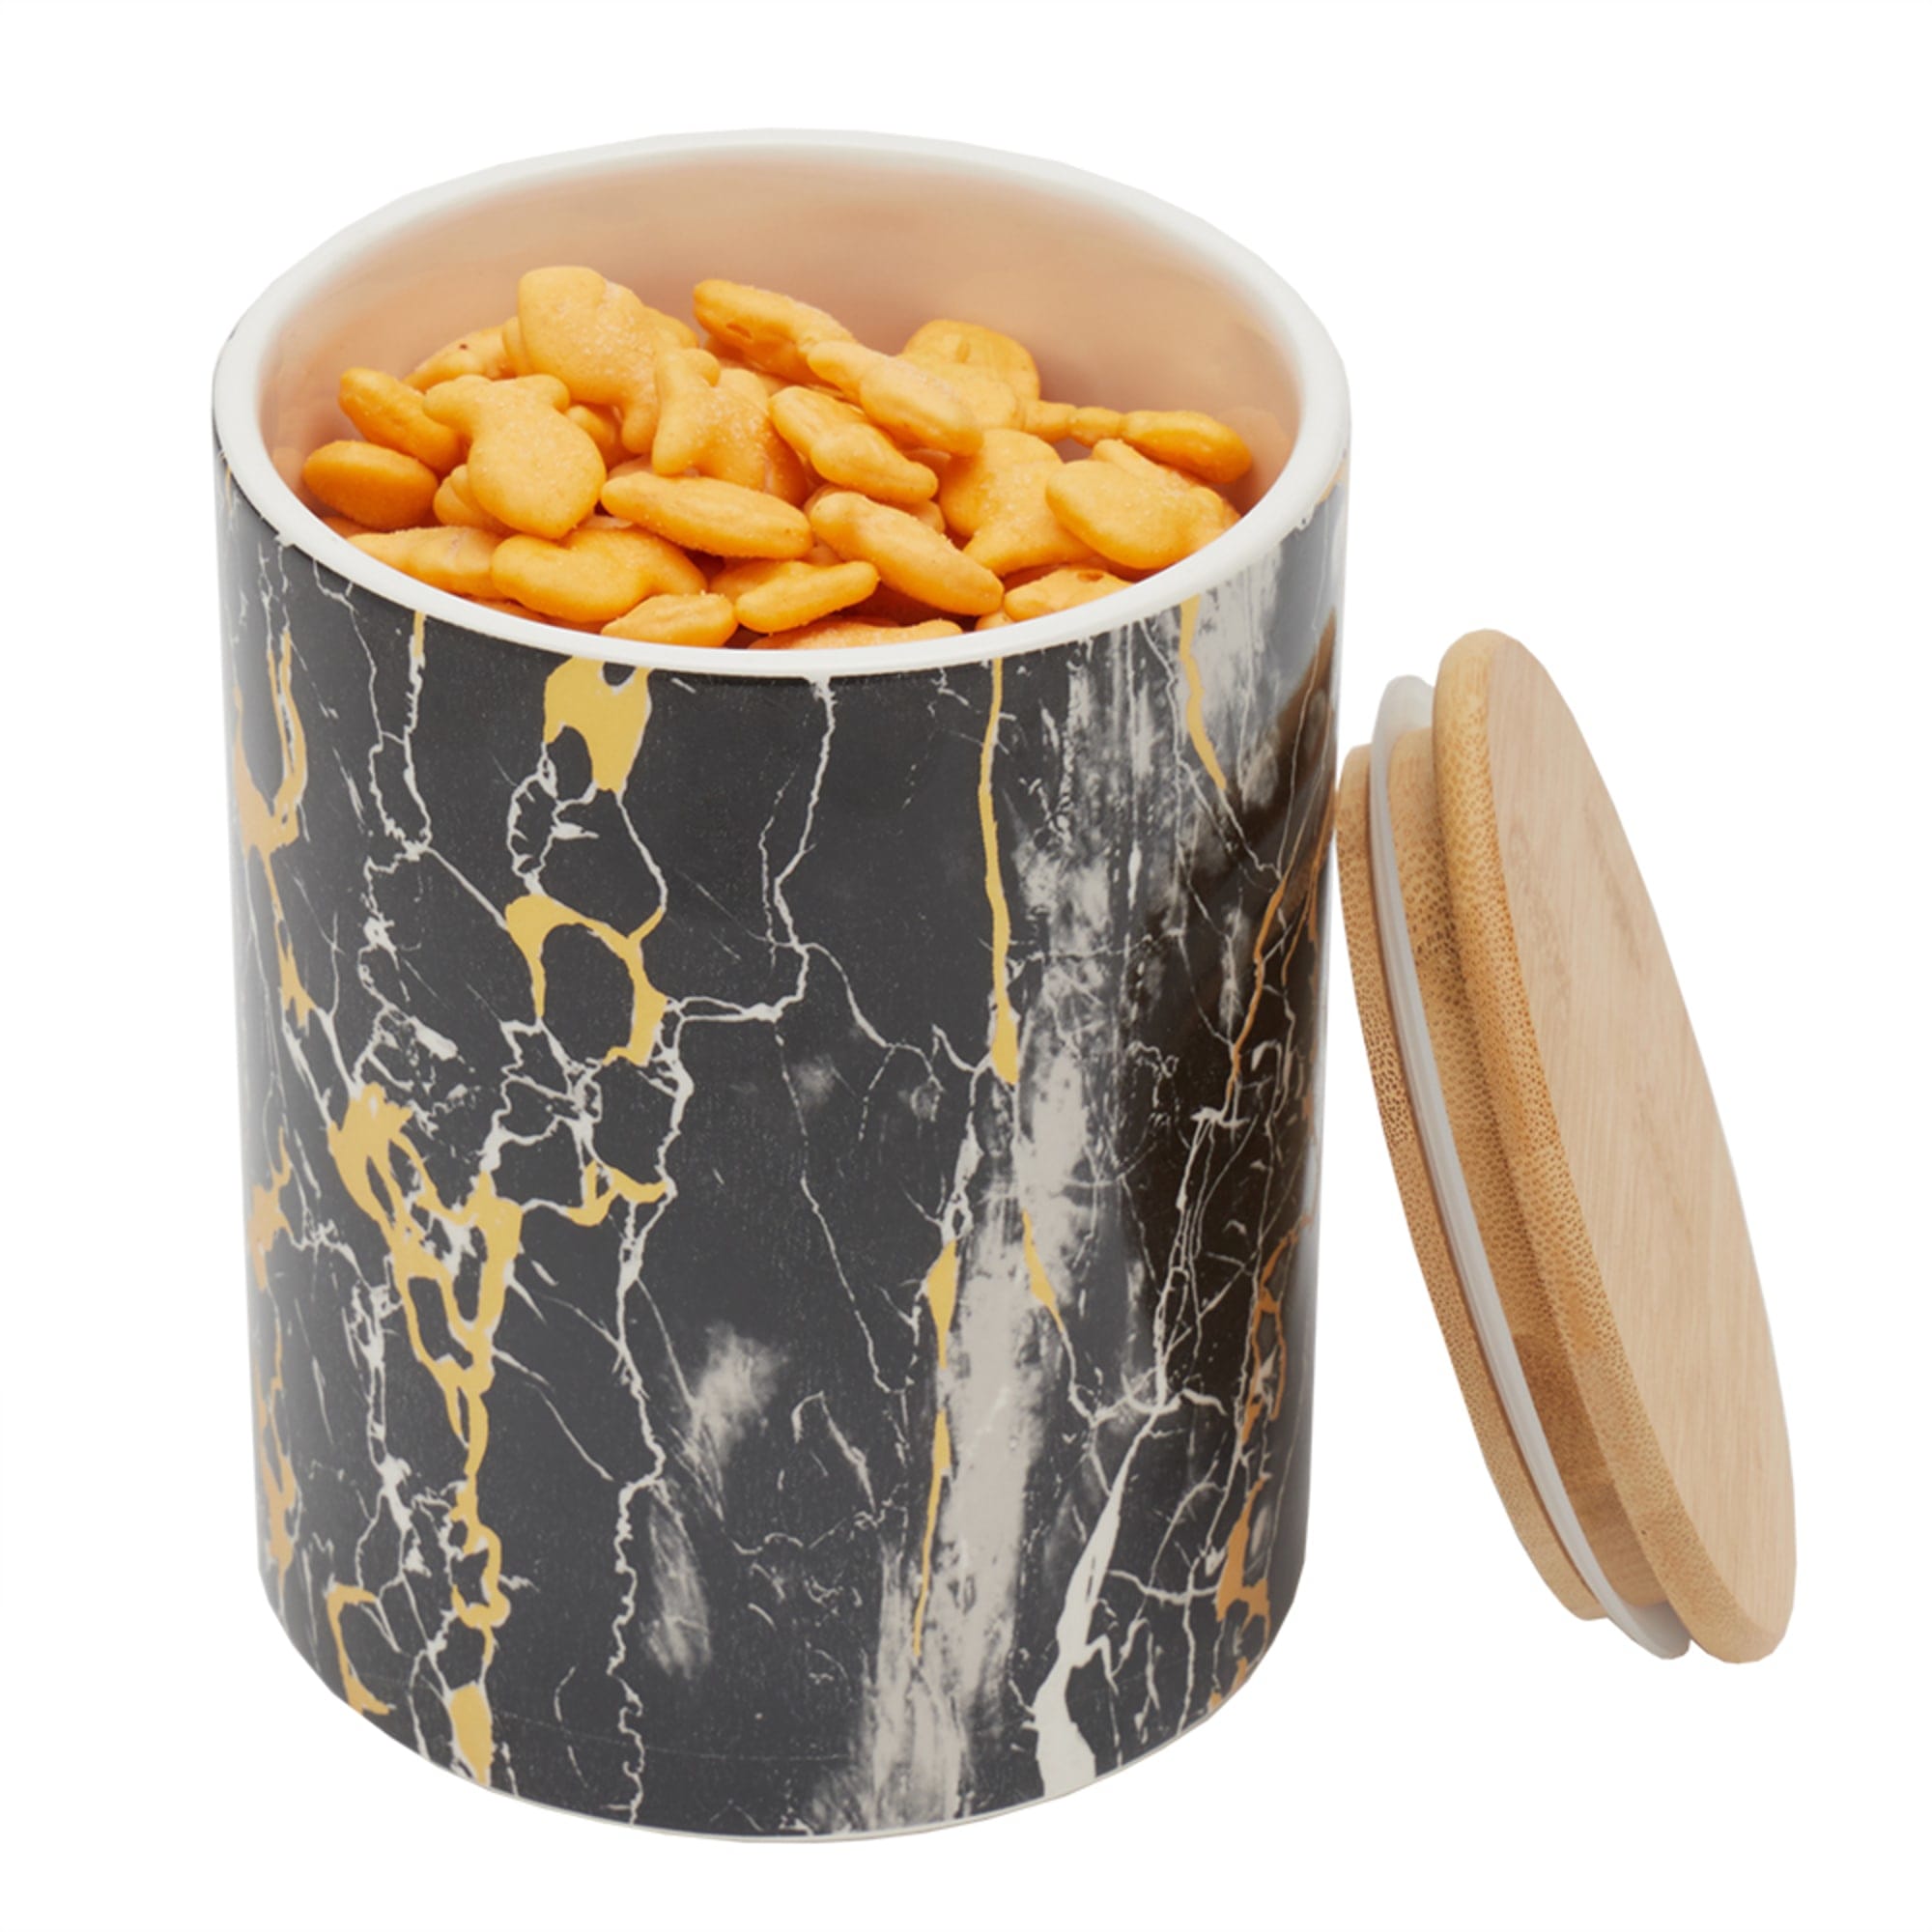 Home Basics Marble Like Medium Ceramic Canister with Bamboo Top, Black
 $6.00 EACH, CASE PACK OF 12